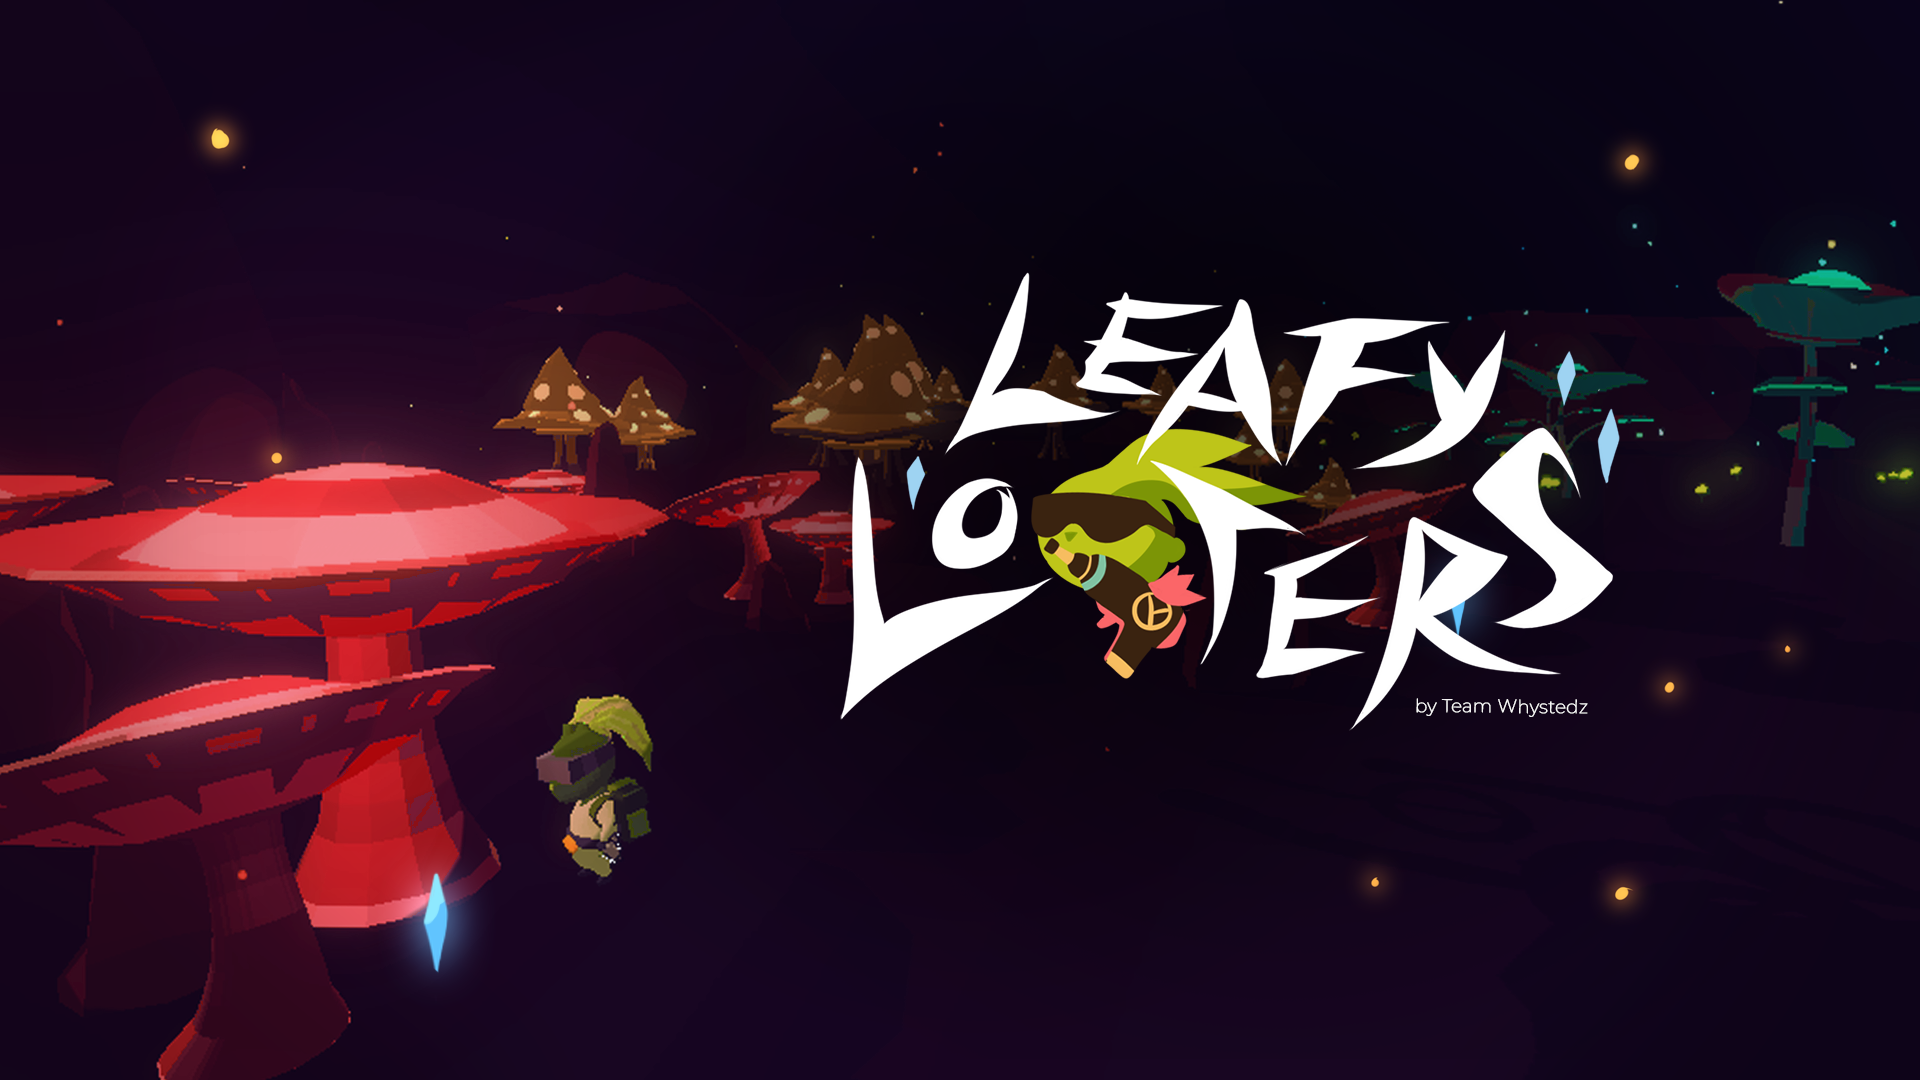 Leafy Looters